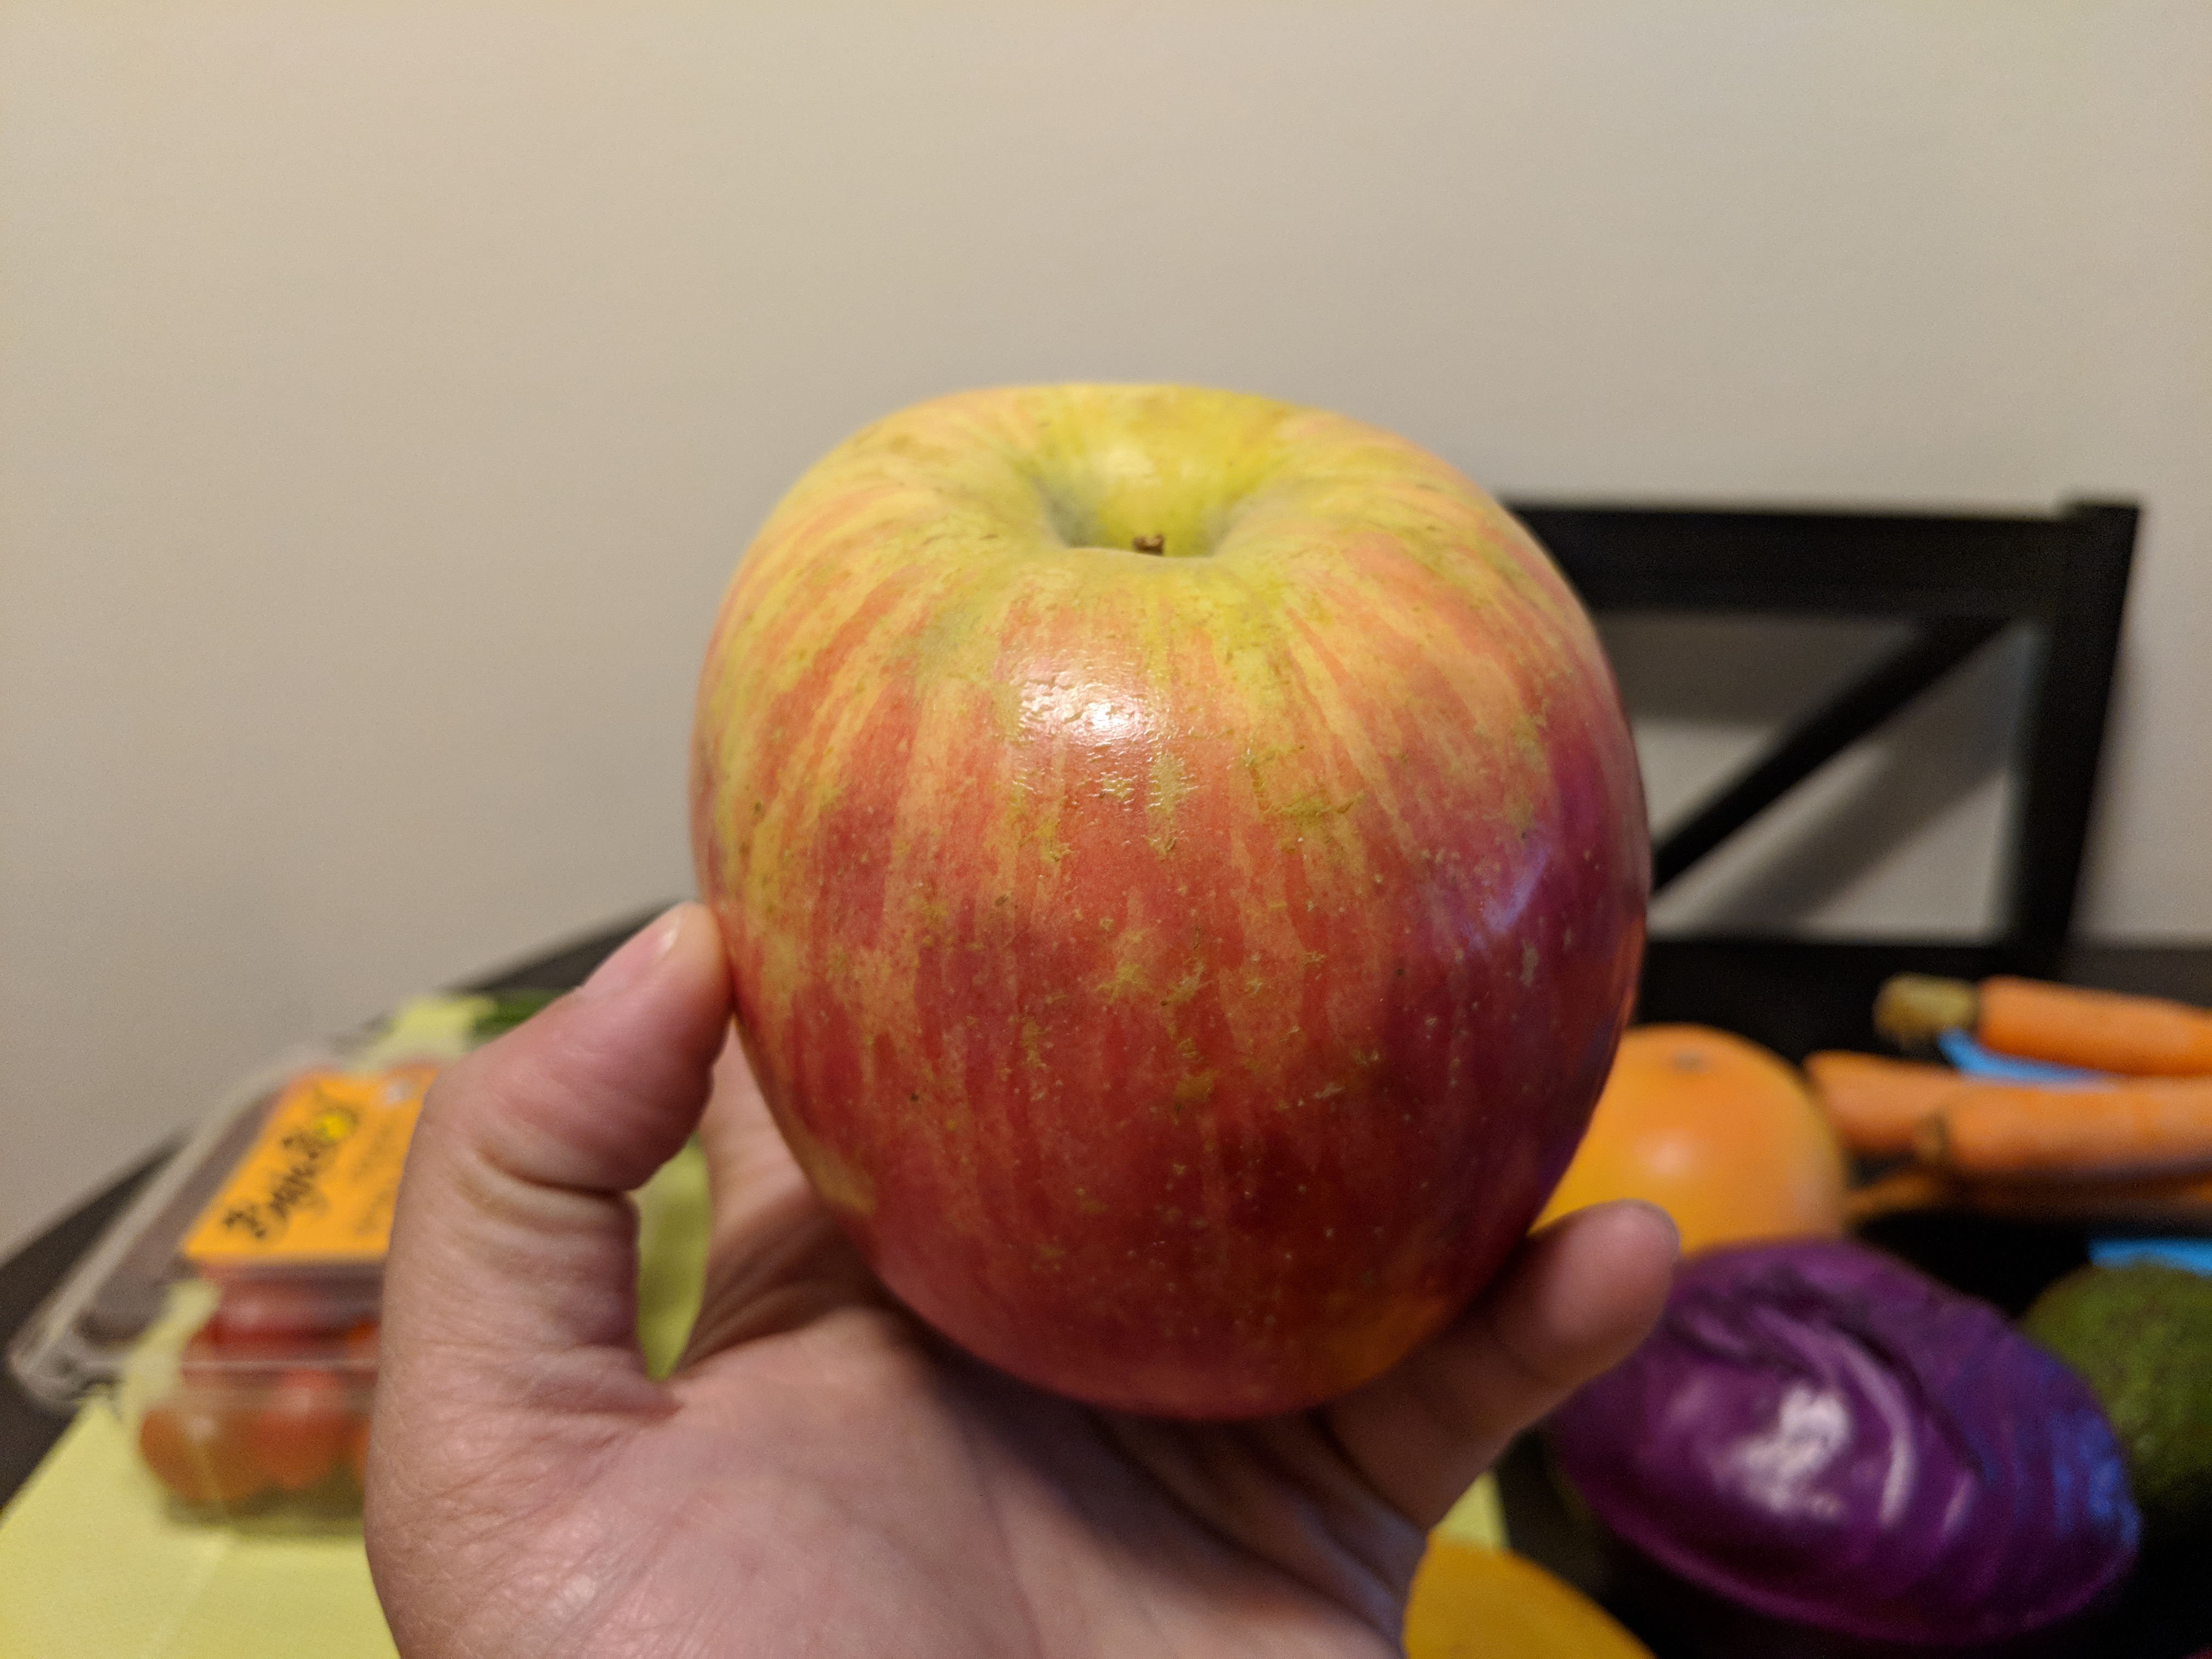 Imperfect Produce Box Review and Reveal - Apple